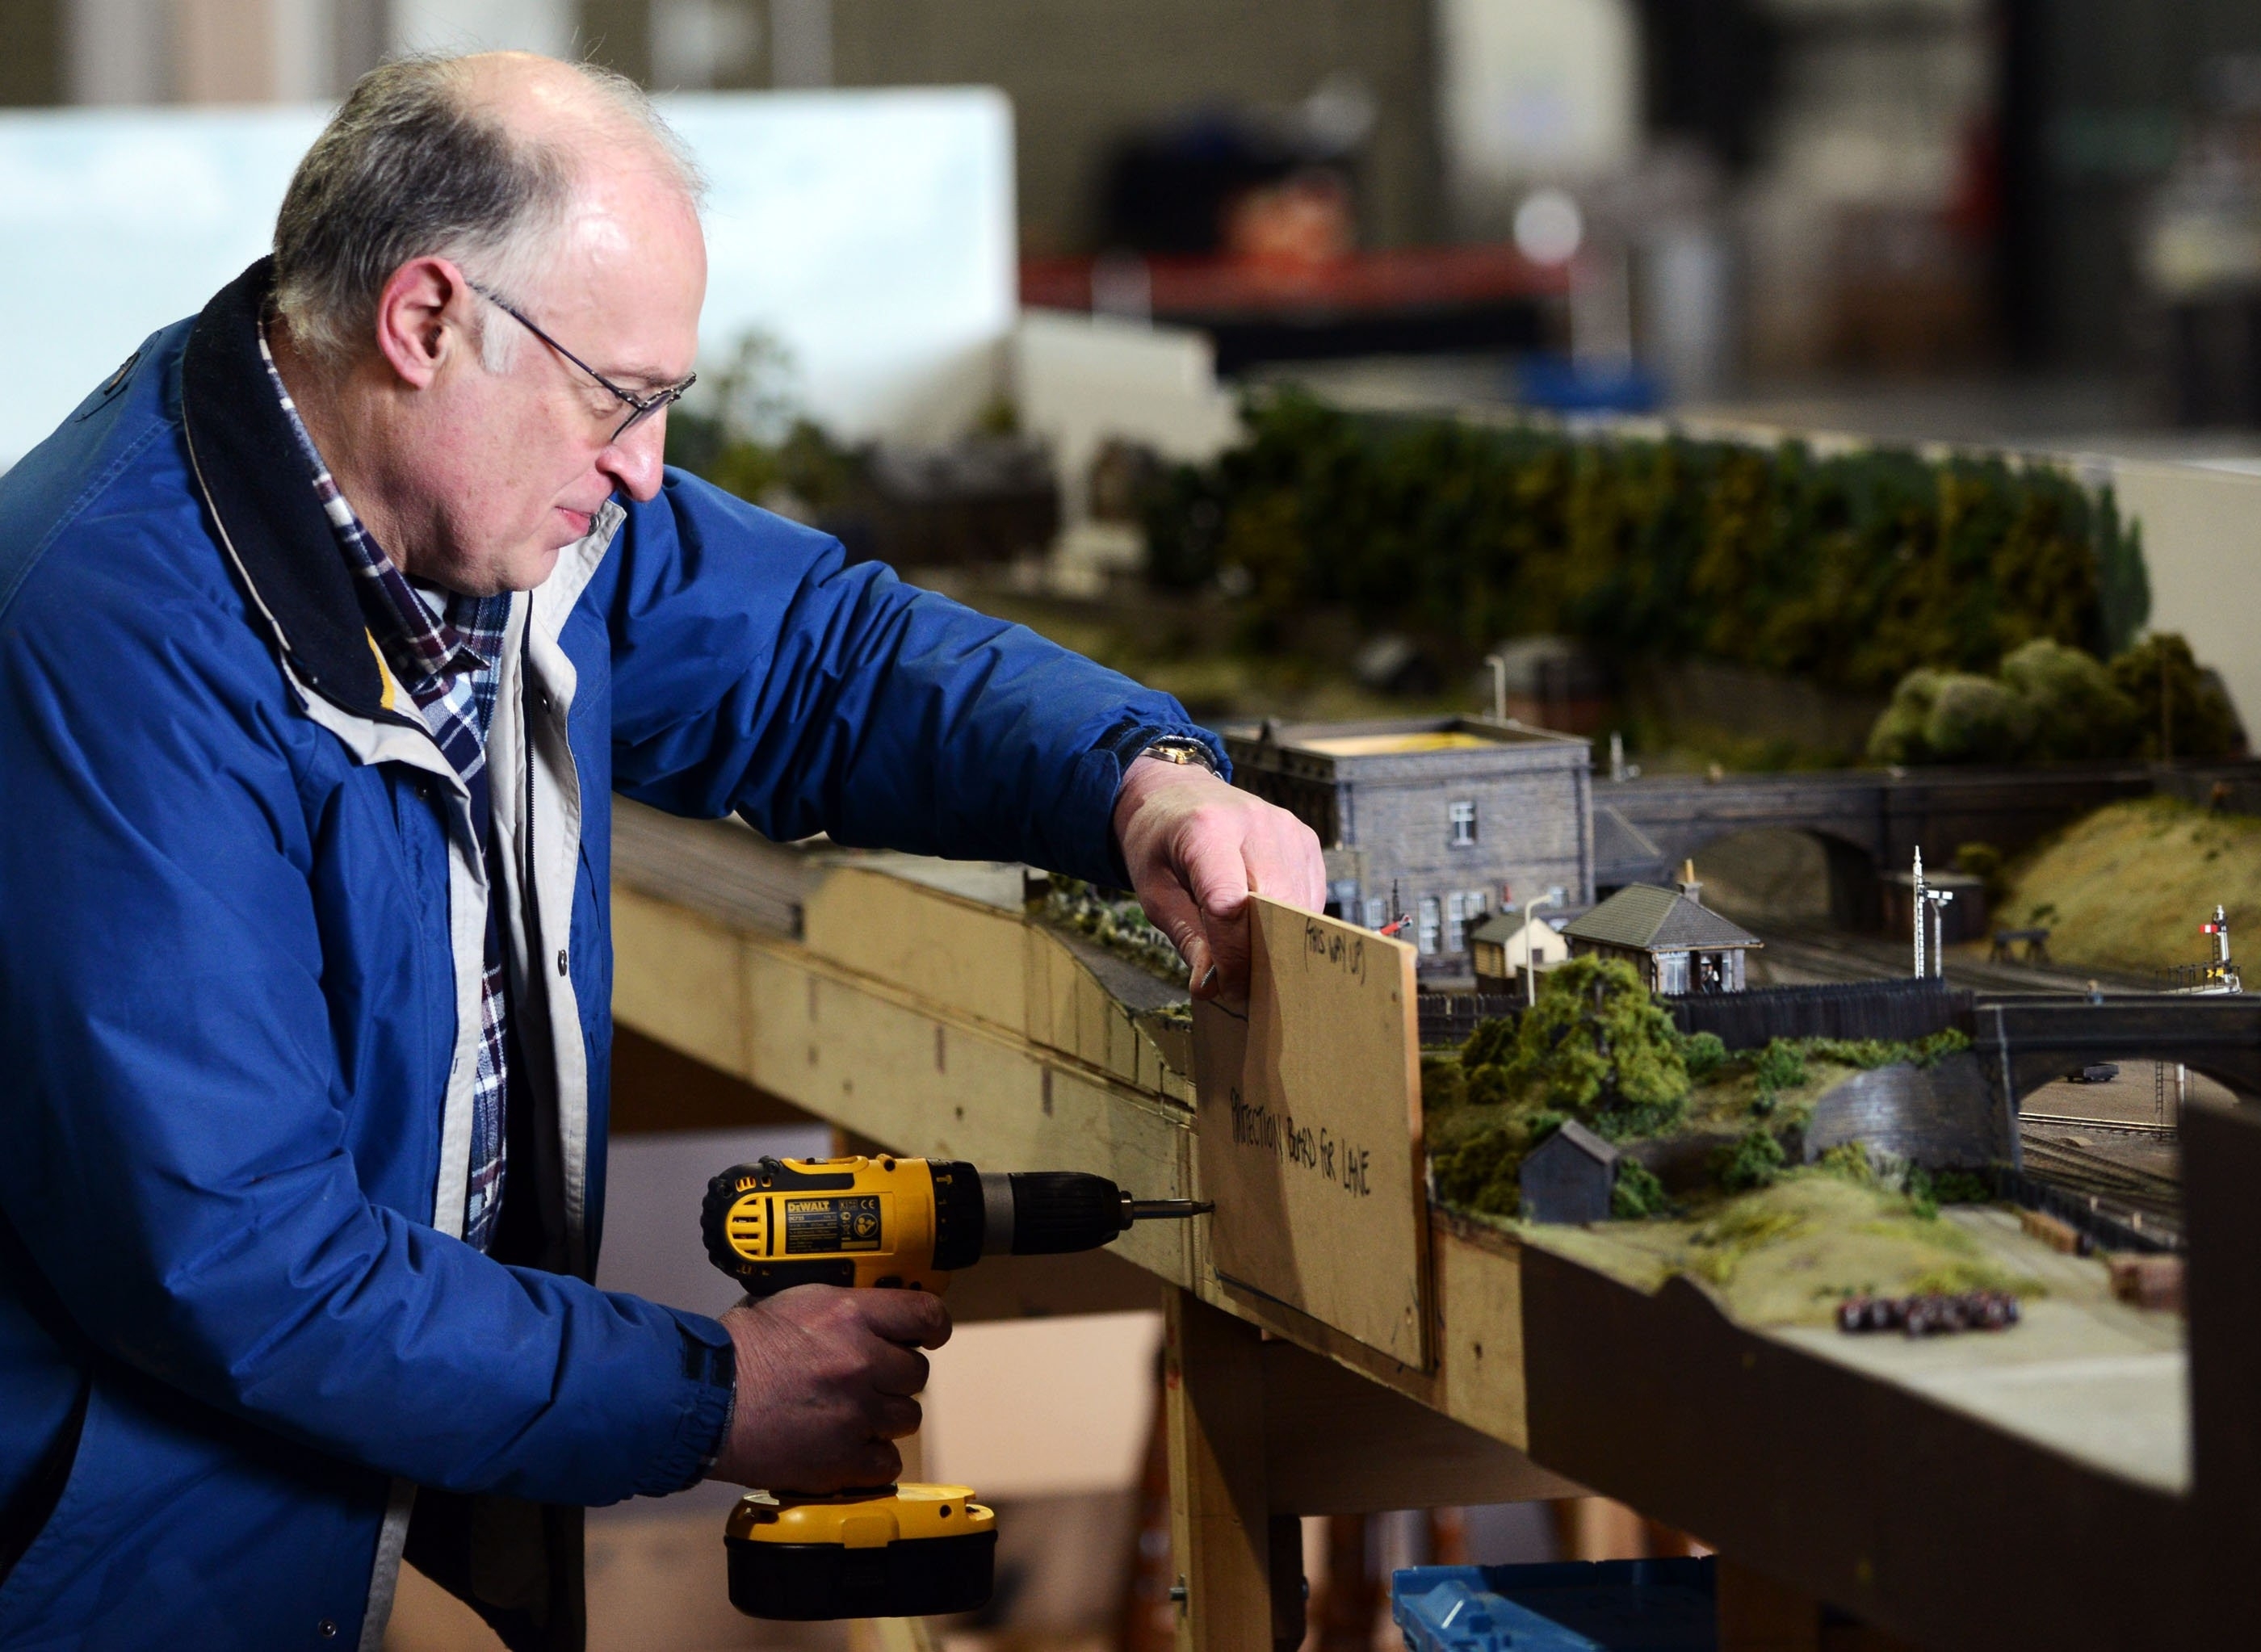 Members get their layout ready, a model of the Old Railway Station in Alloa, ahead of the 50th annual gathering of model railway enthusiasts displaying at Glasgow's SECC from tomorrow, Friday 26th to Sunday 28th Febuary, where 30 different clubs from across the UK and further are expected to display.